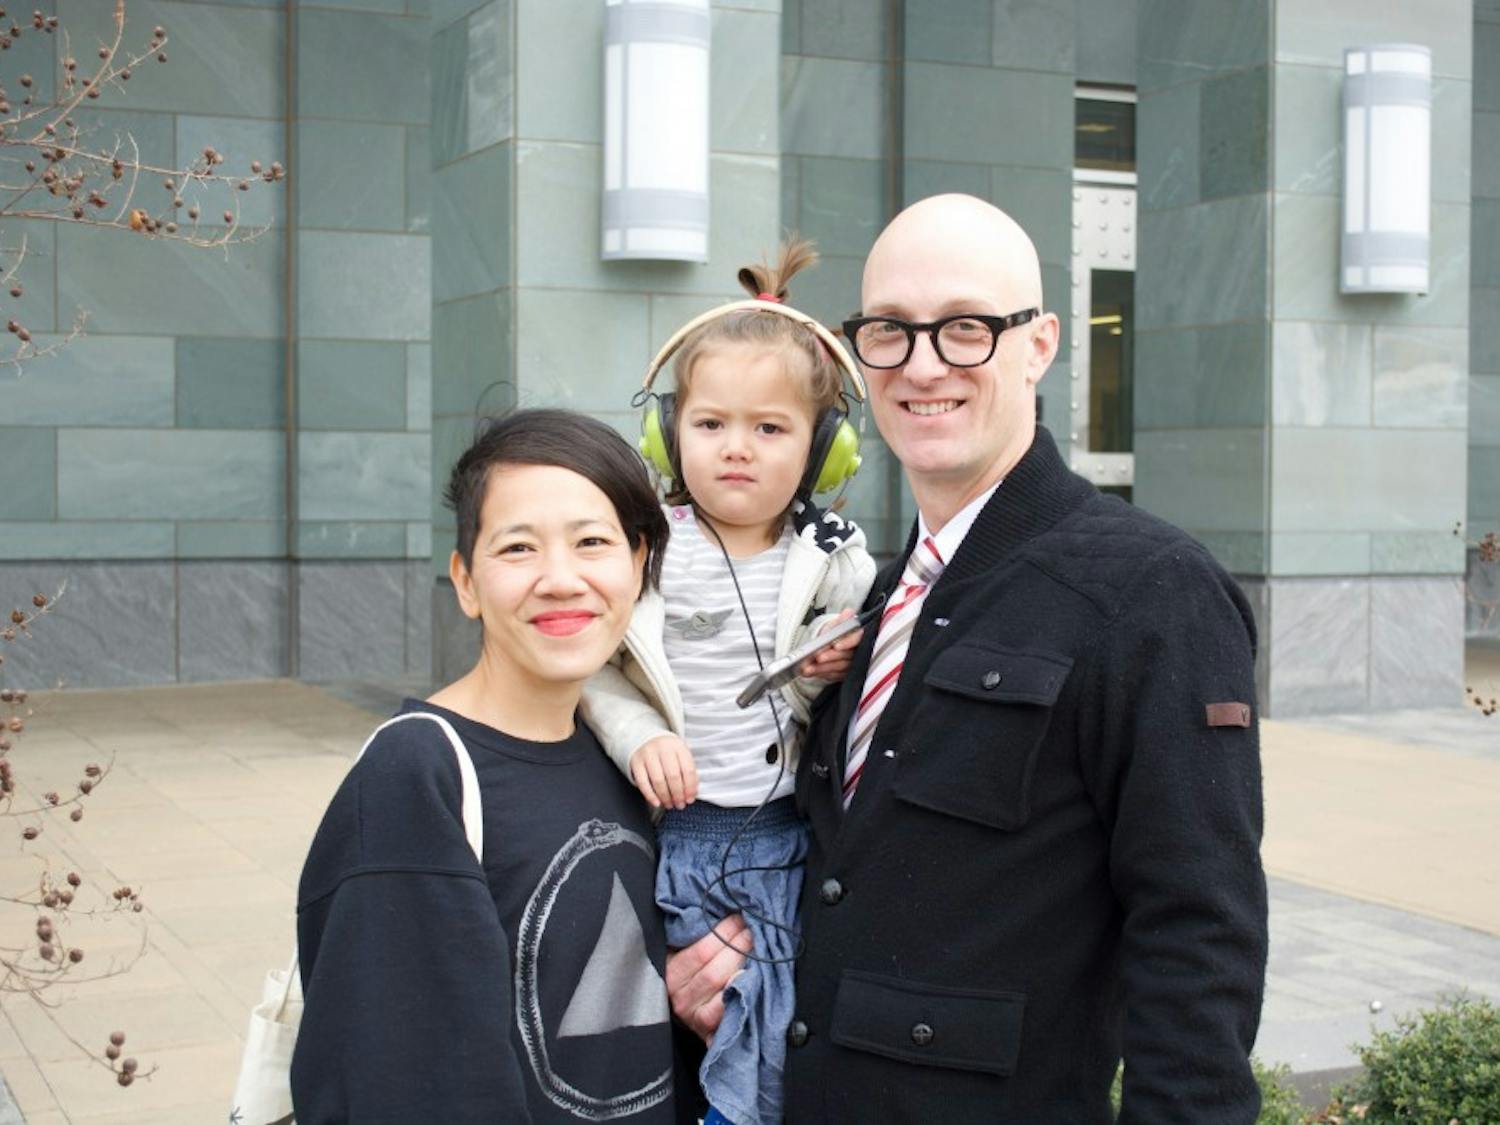 UNC Asian studies teaching assistant professor Dwayne Dixon poses with his family outside the Durham County Courthouse. Dixon, who is charged with bringing a weapon to a demonstration, had his case postponed until Feb. 8.